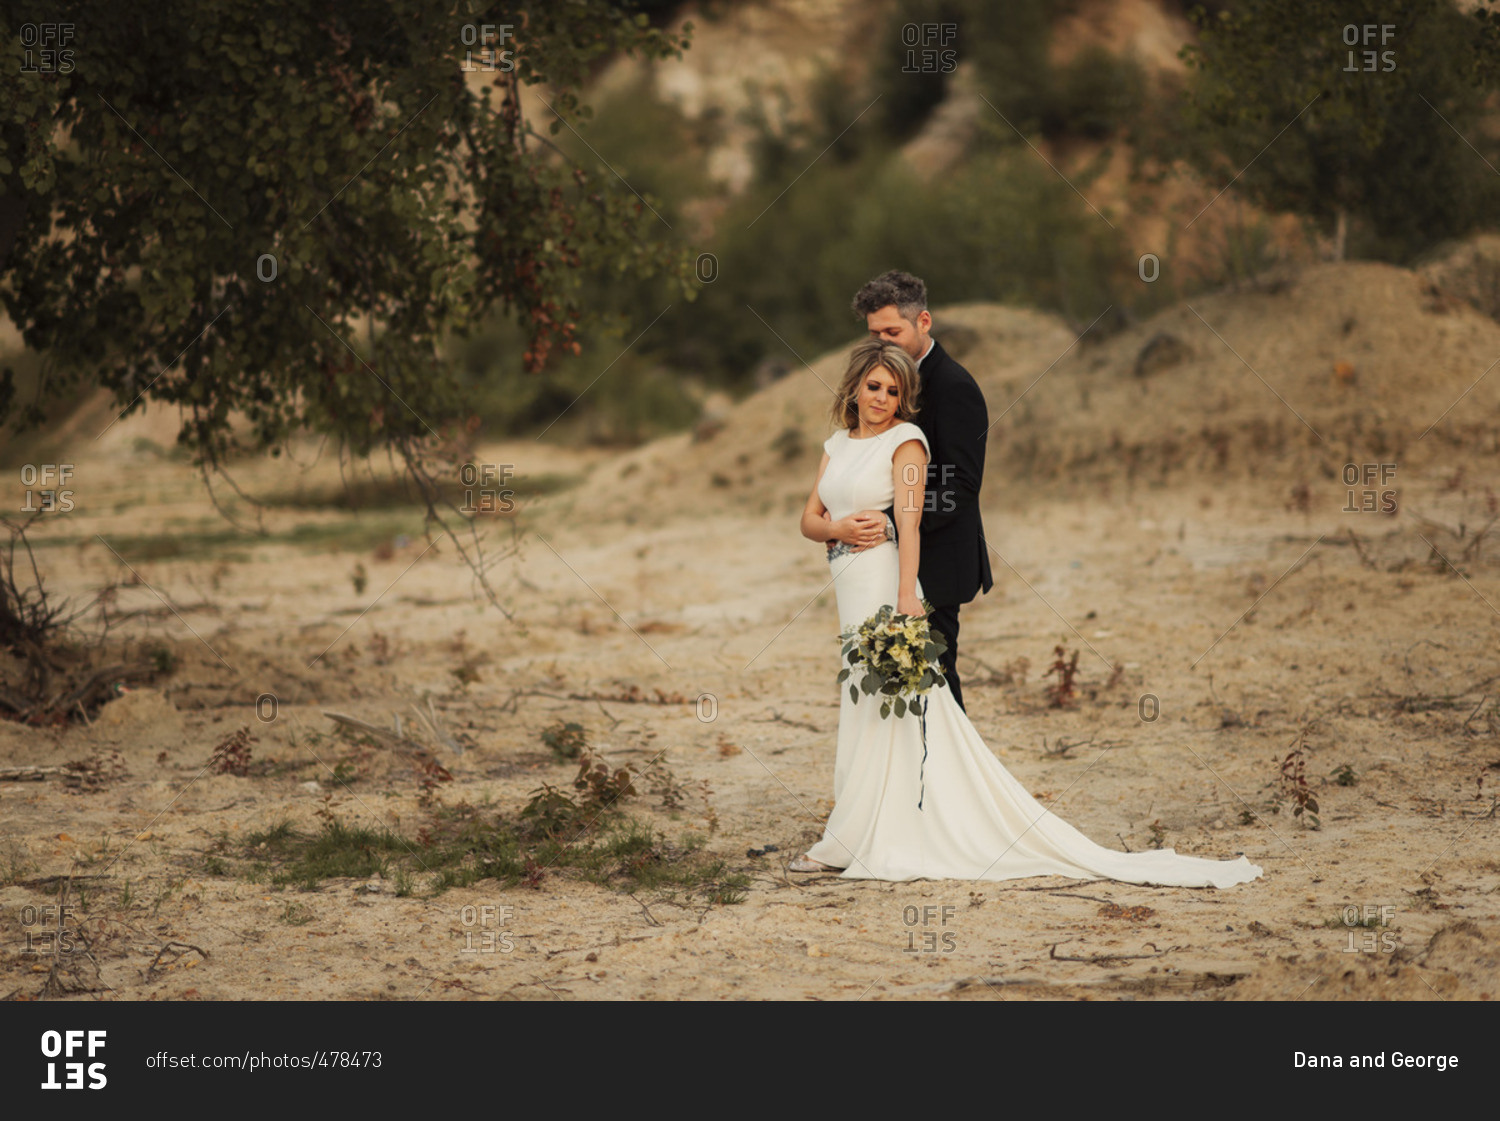 Bridal couple in embrace in remote setting